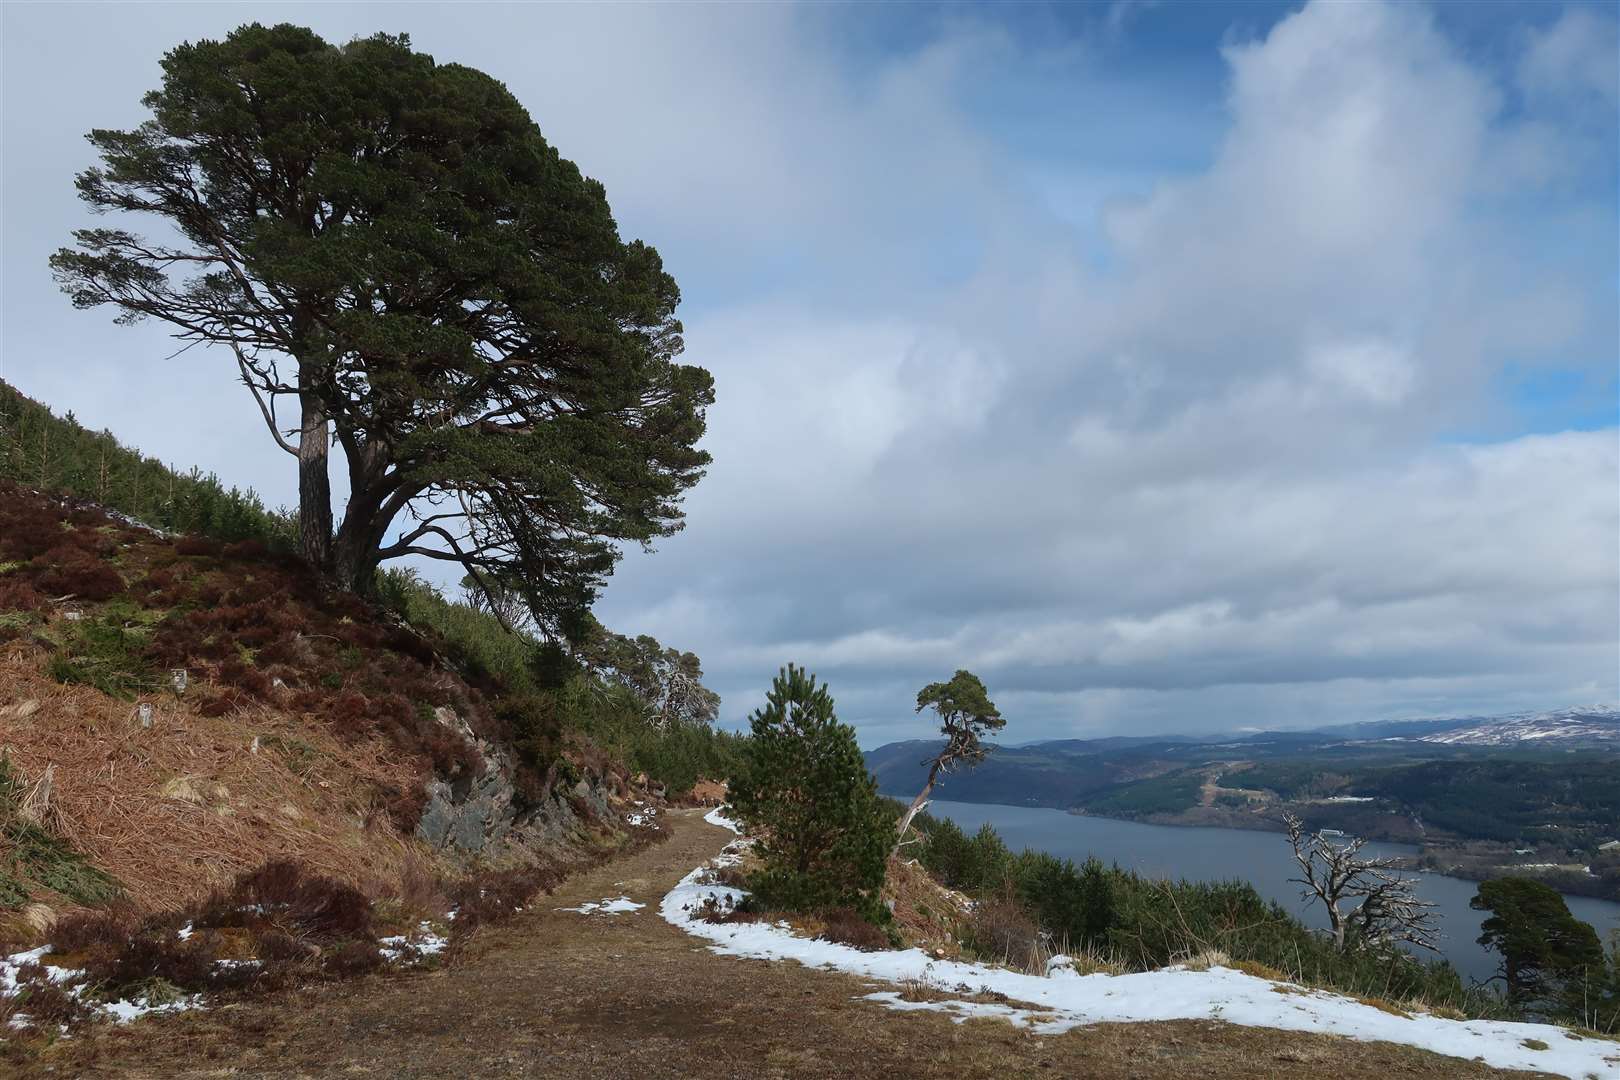 The view north along Loch Ness from the 'S' bench on the Great Glen Way high-level route..